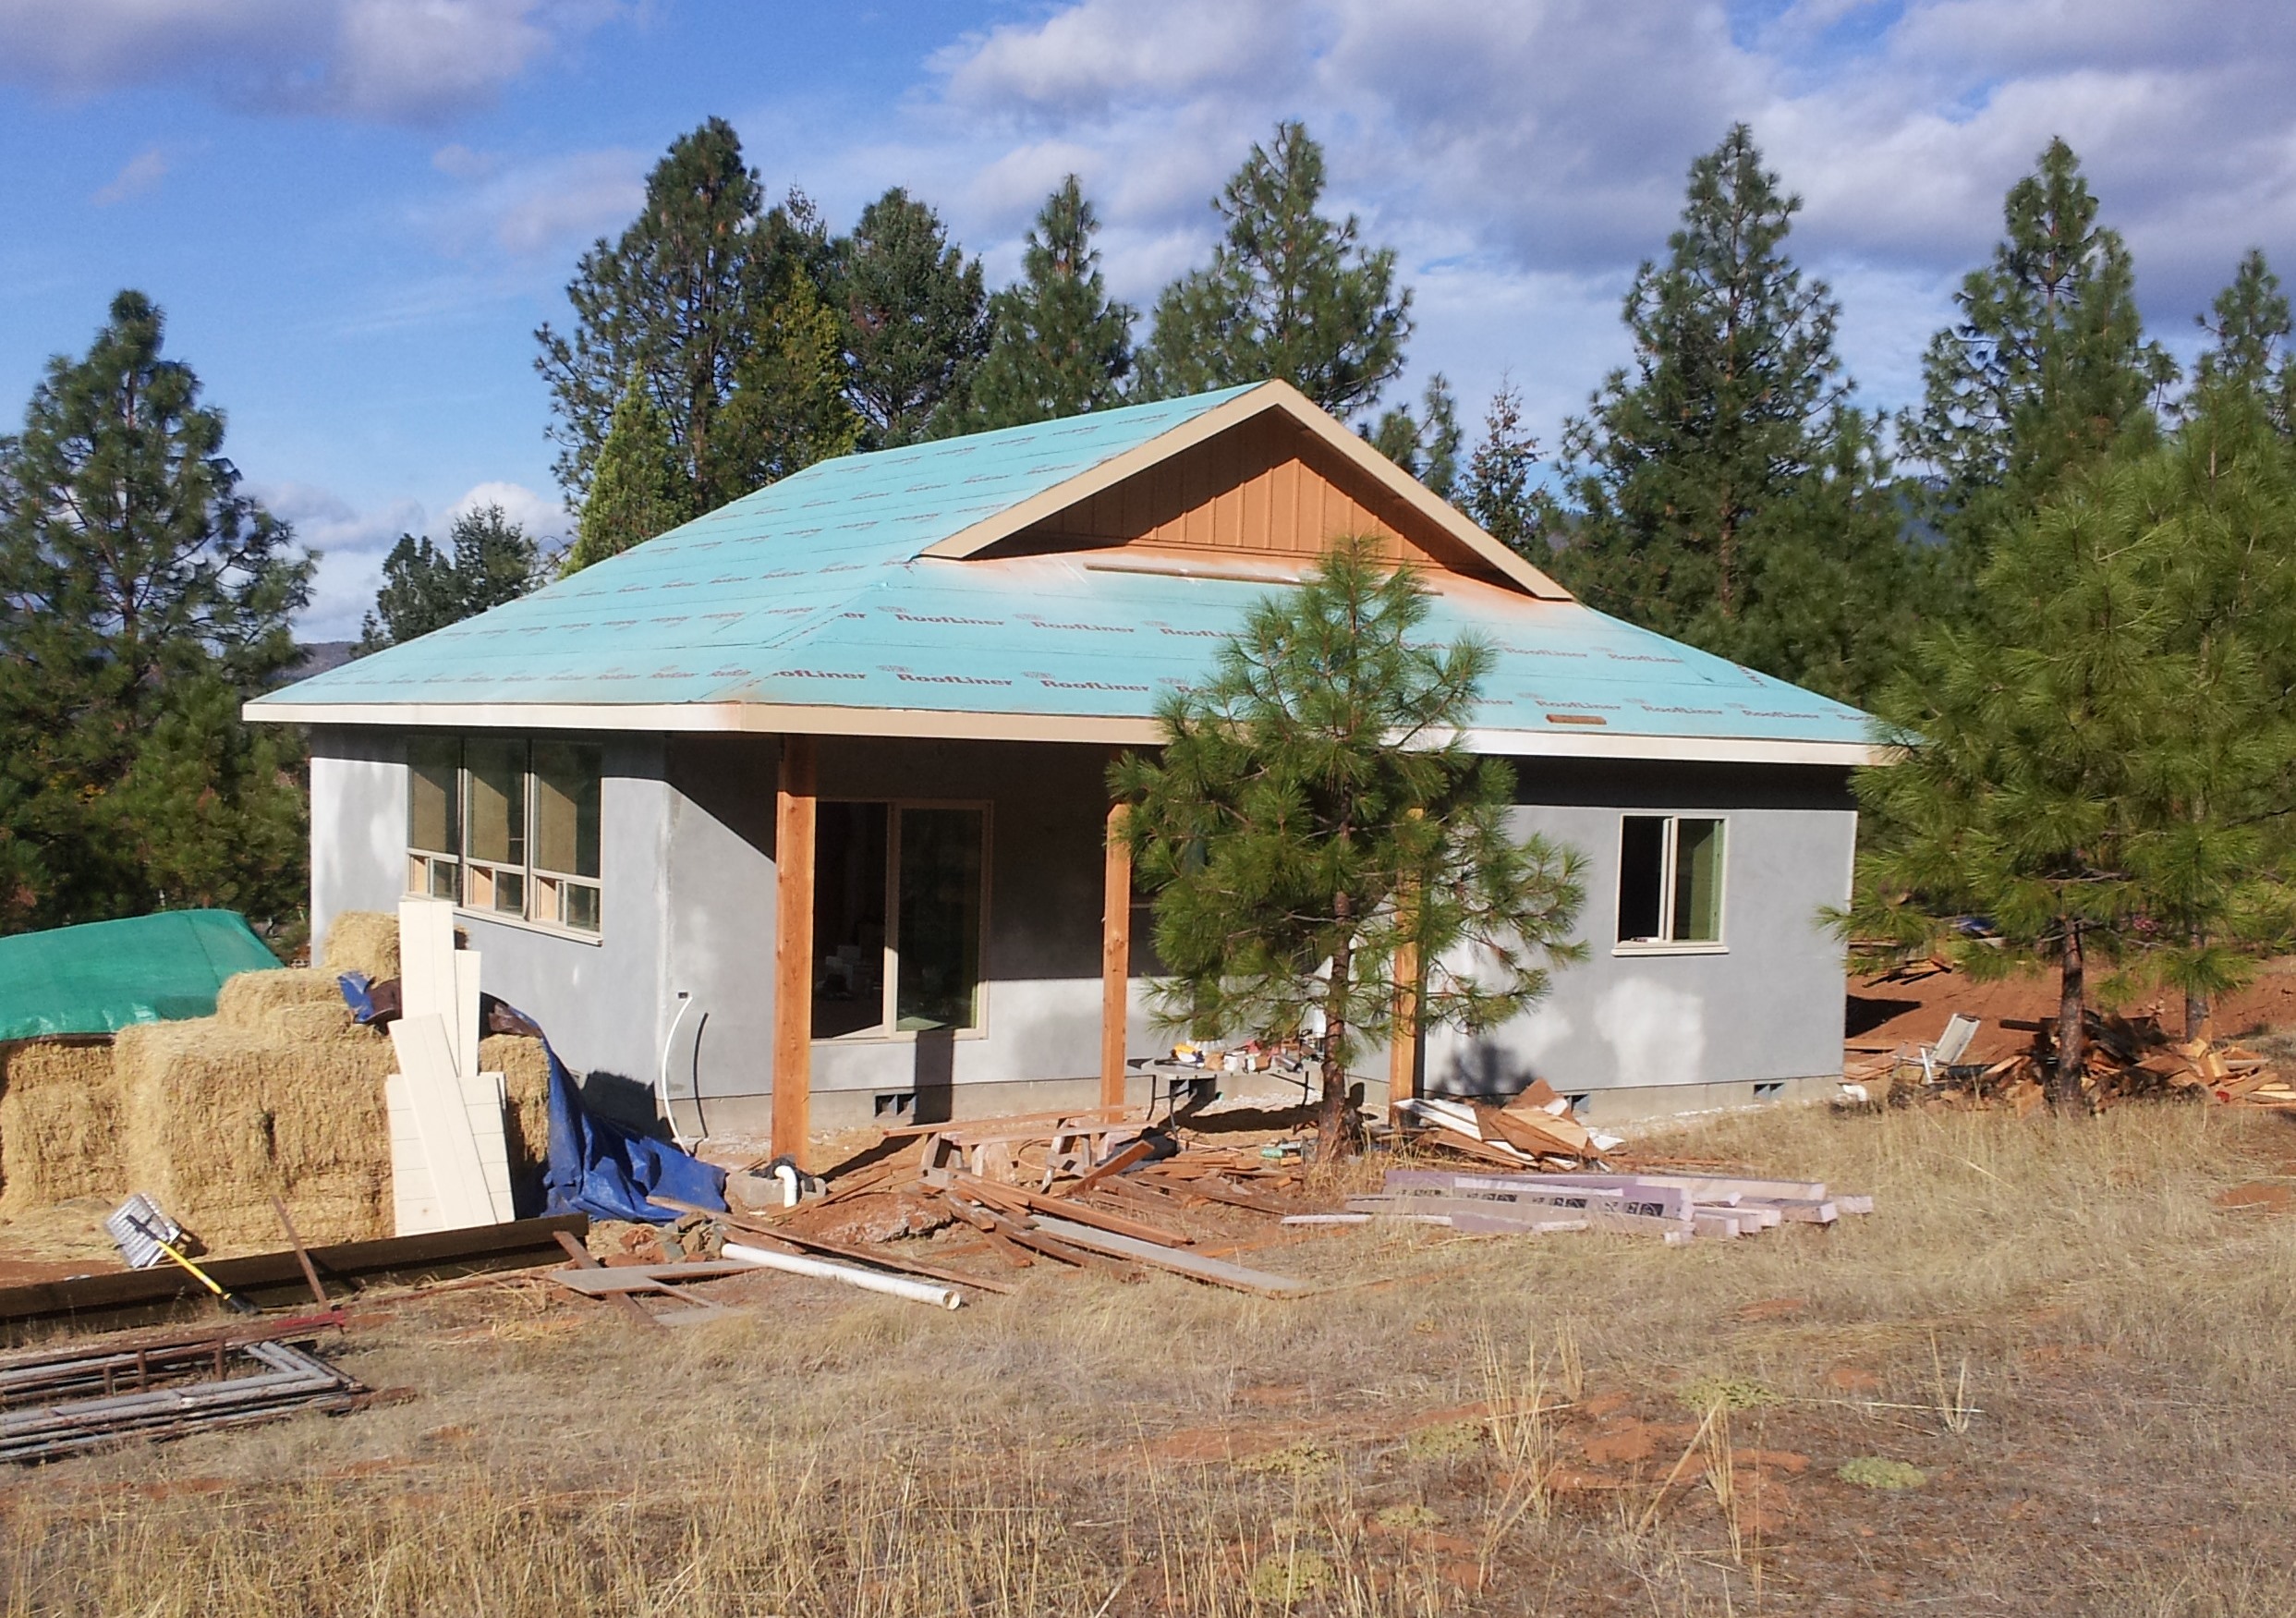  Lime plastered exterior of passive solar straw bale home. 